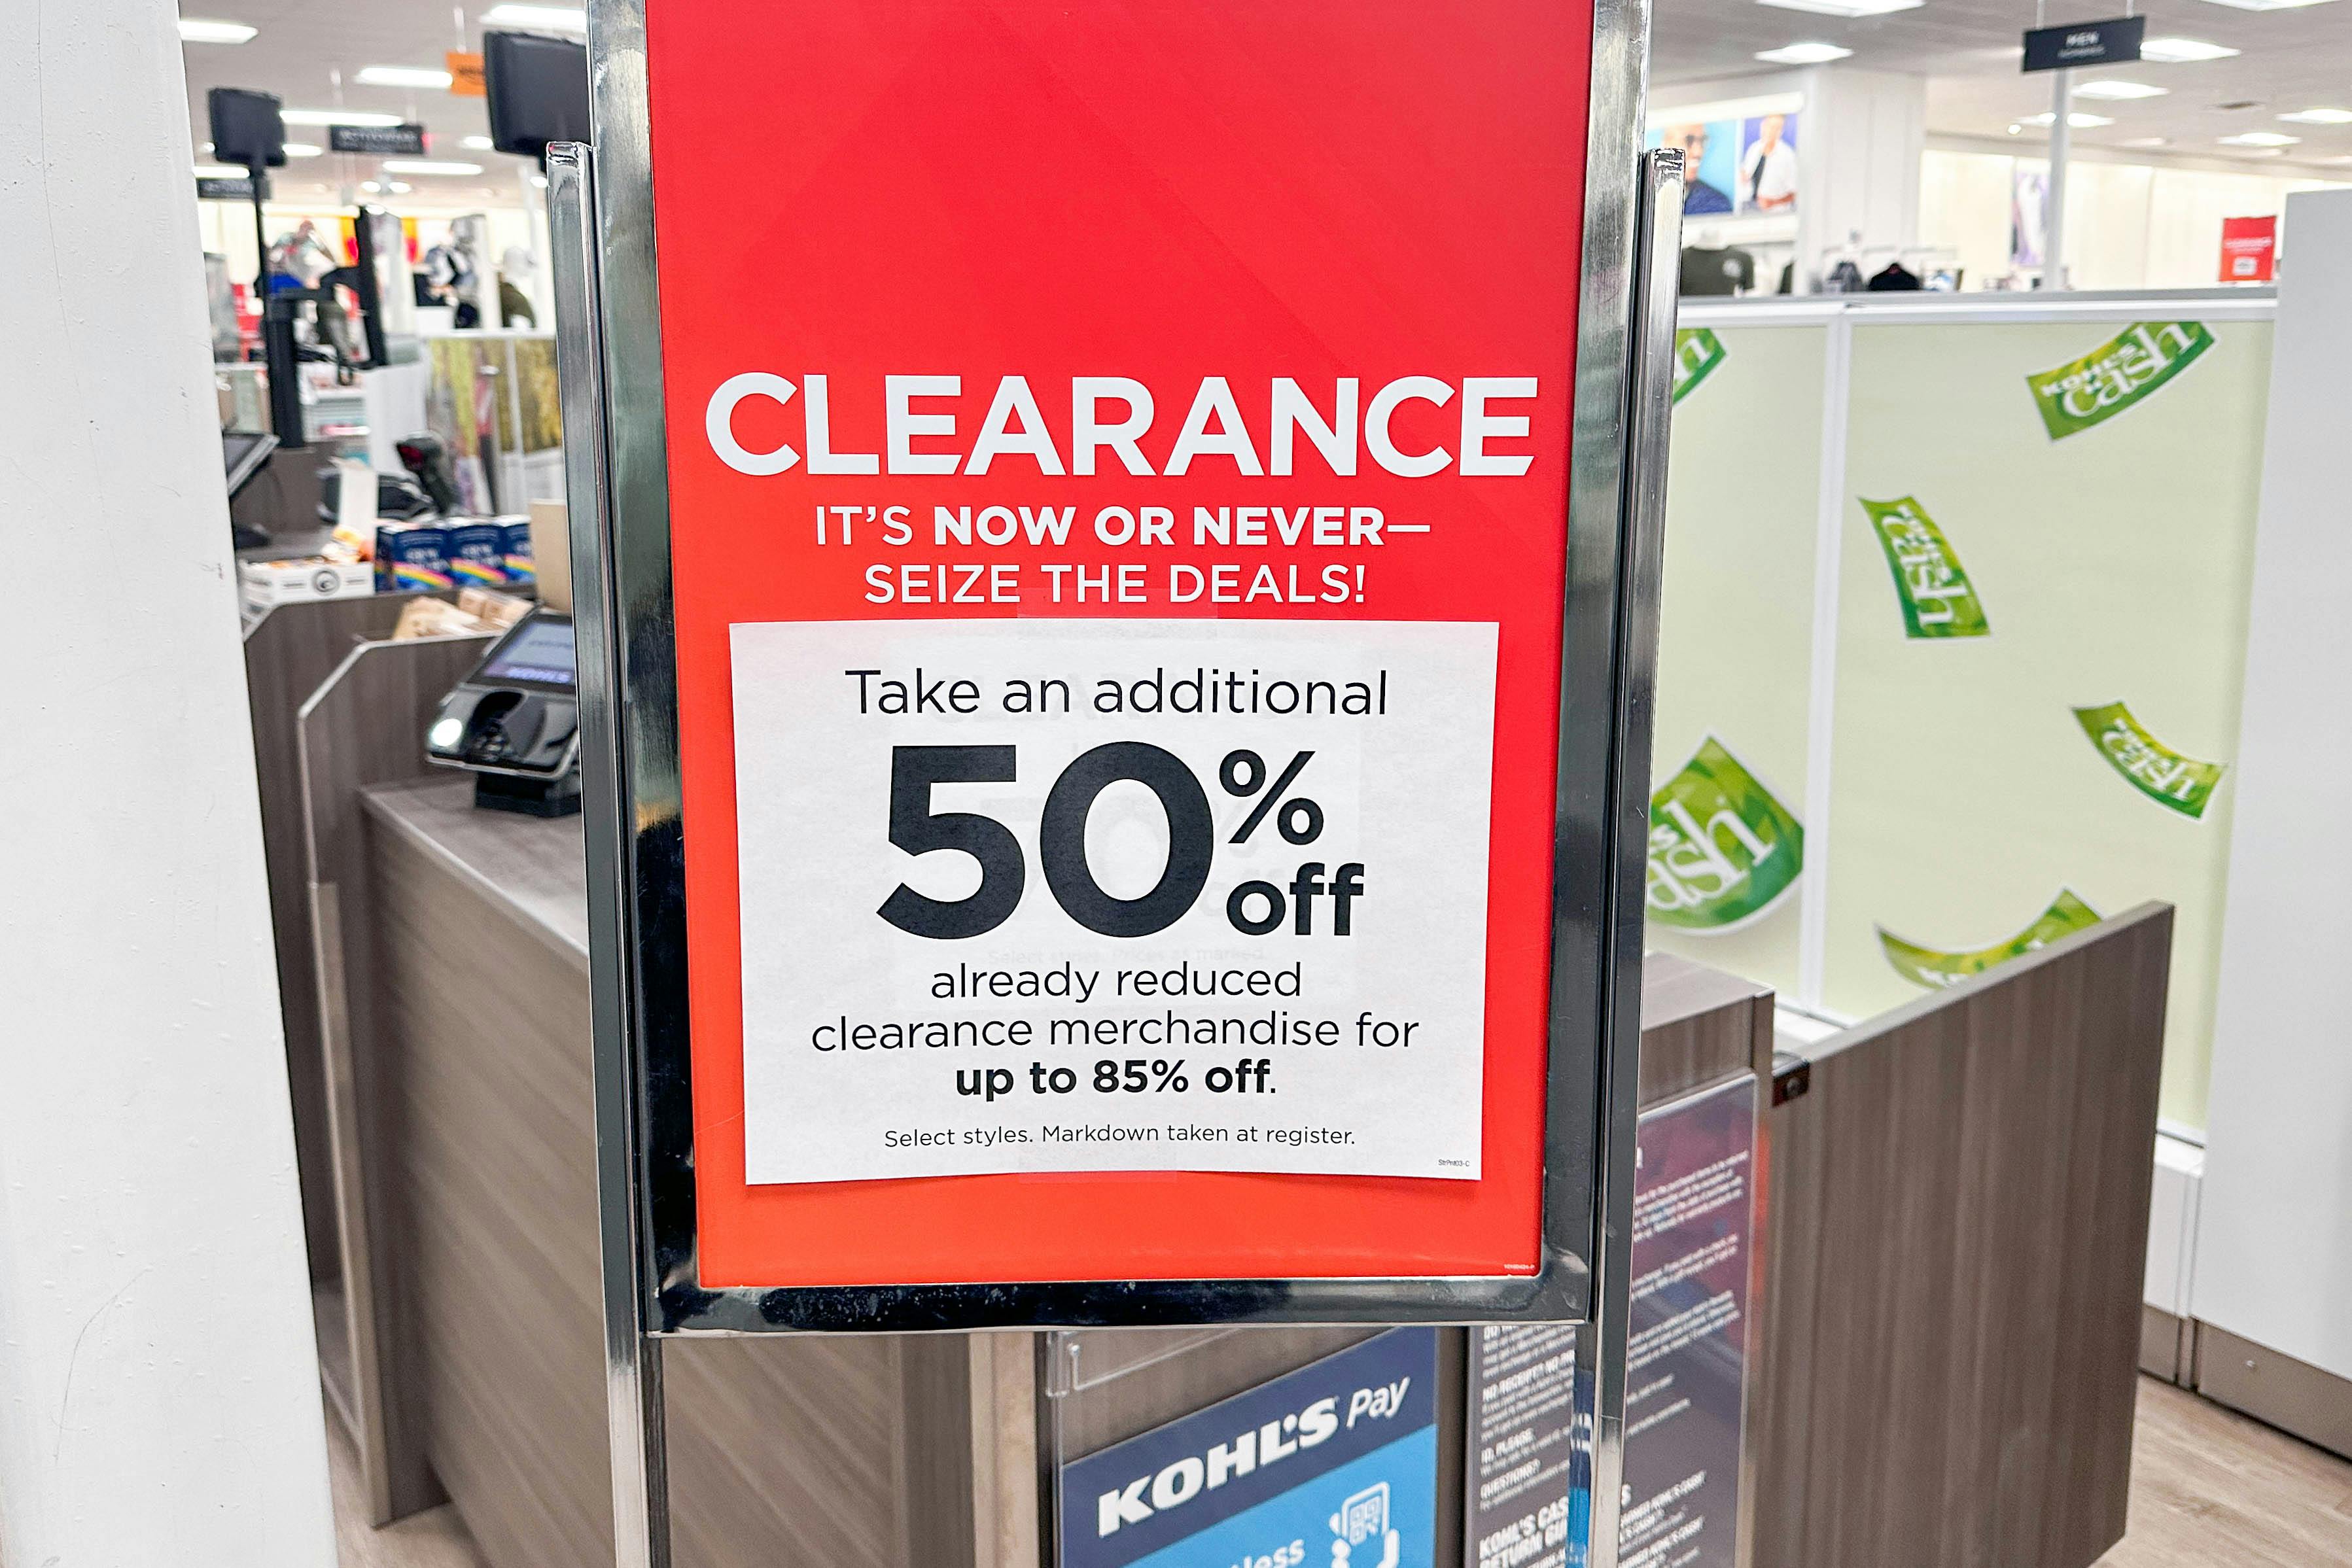 Kohl's Biggest Clearance Sale